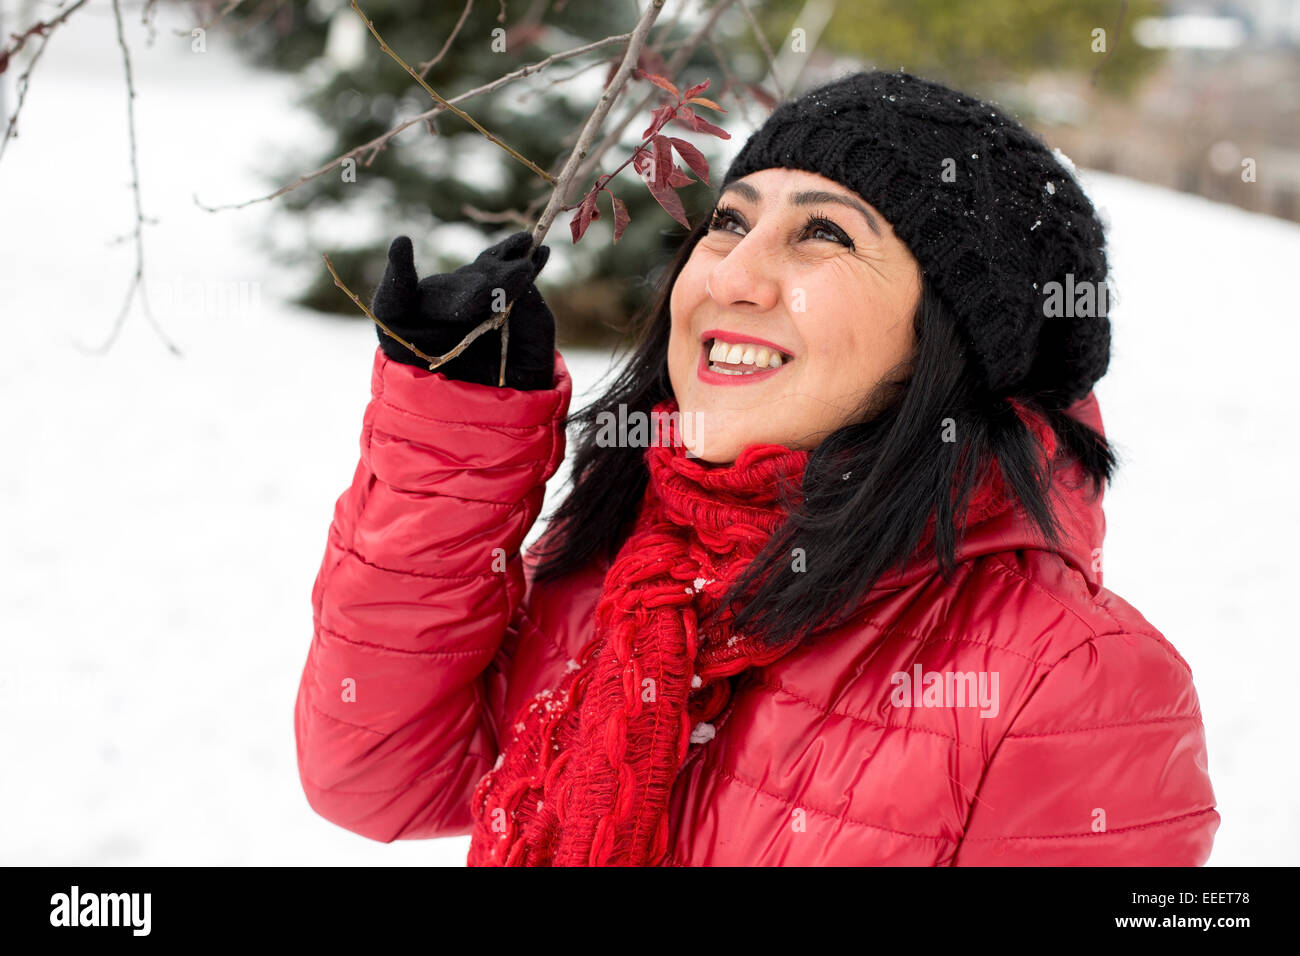 Black haired Turkish women looking at branches on a snowy day Stock Photo